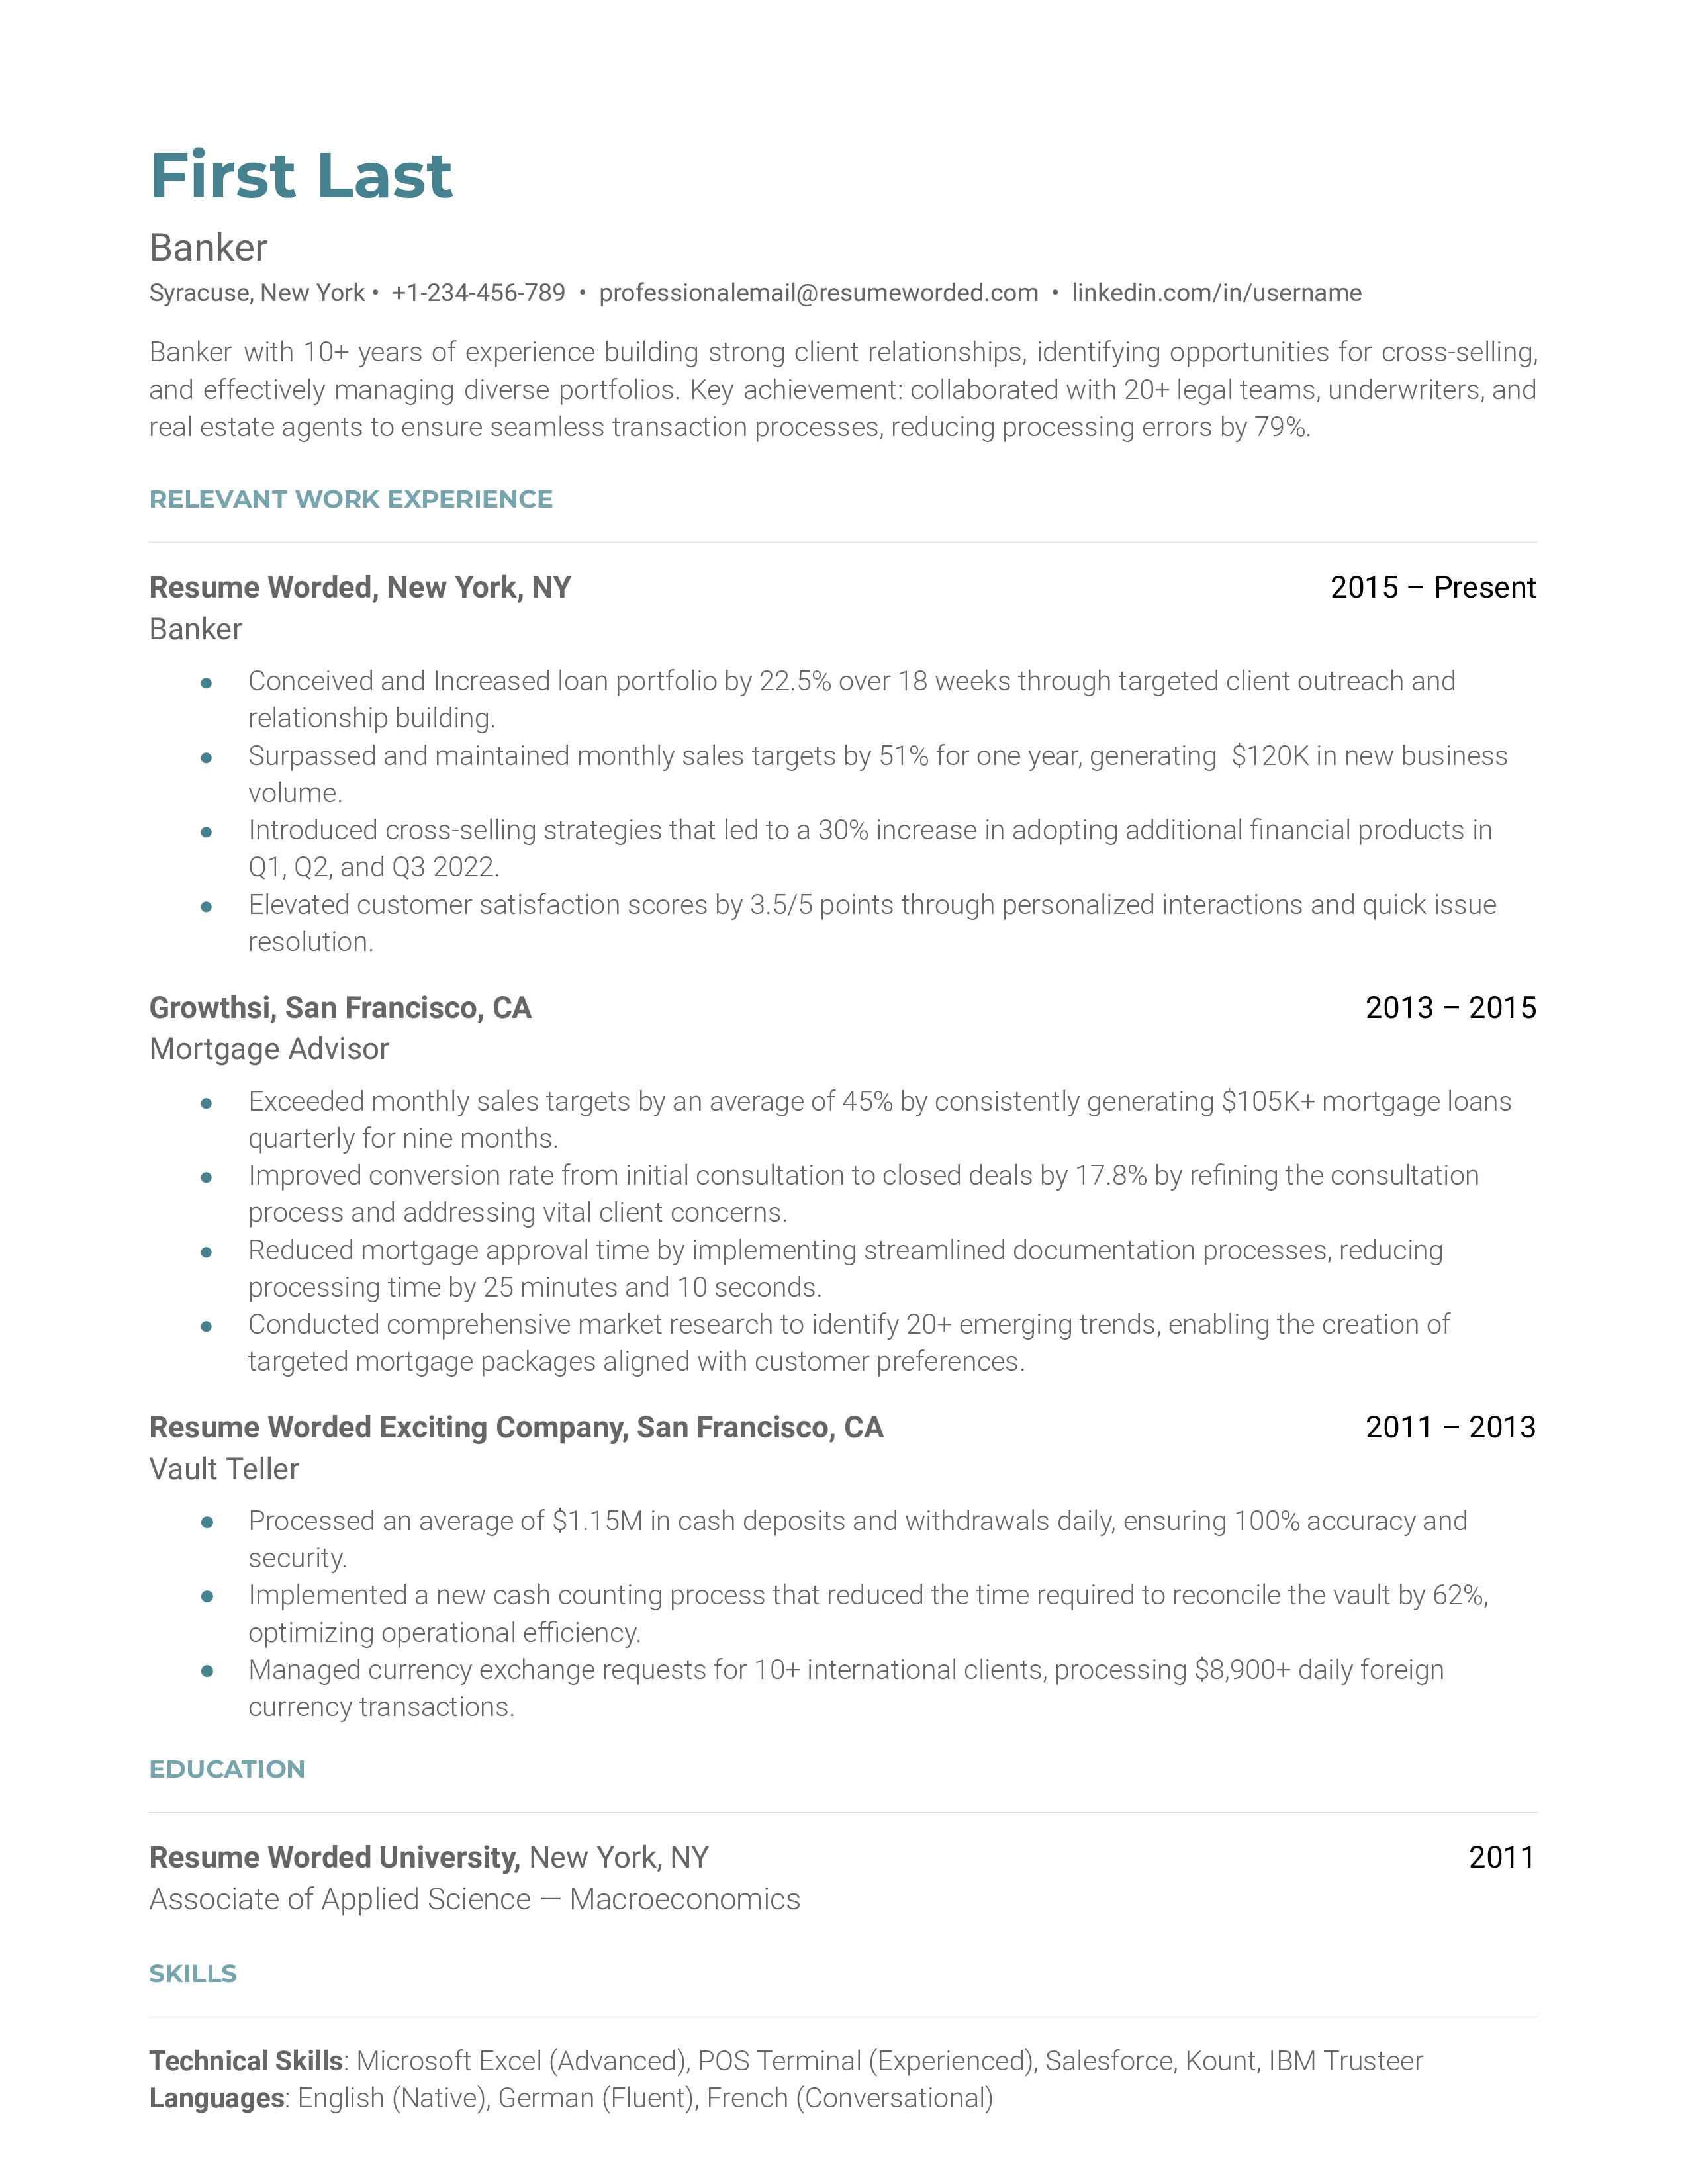 A neat, concise resume showcasing banking skills, digital proficiency, and understanding of ethical banking practices.